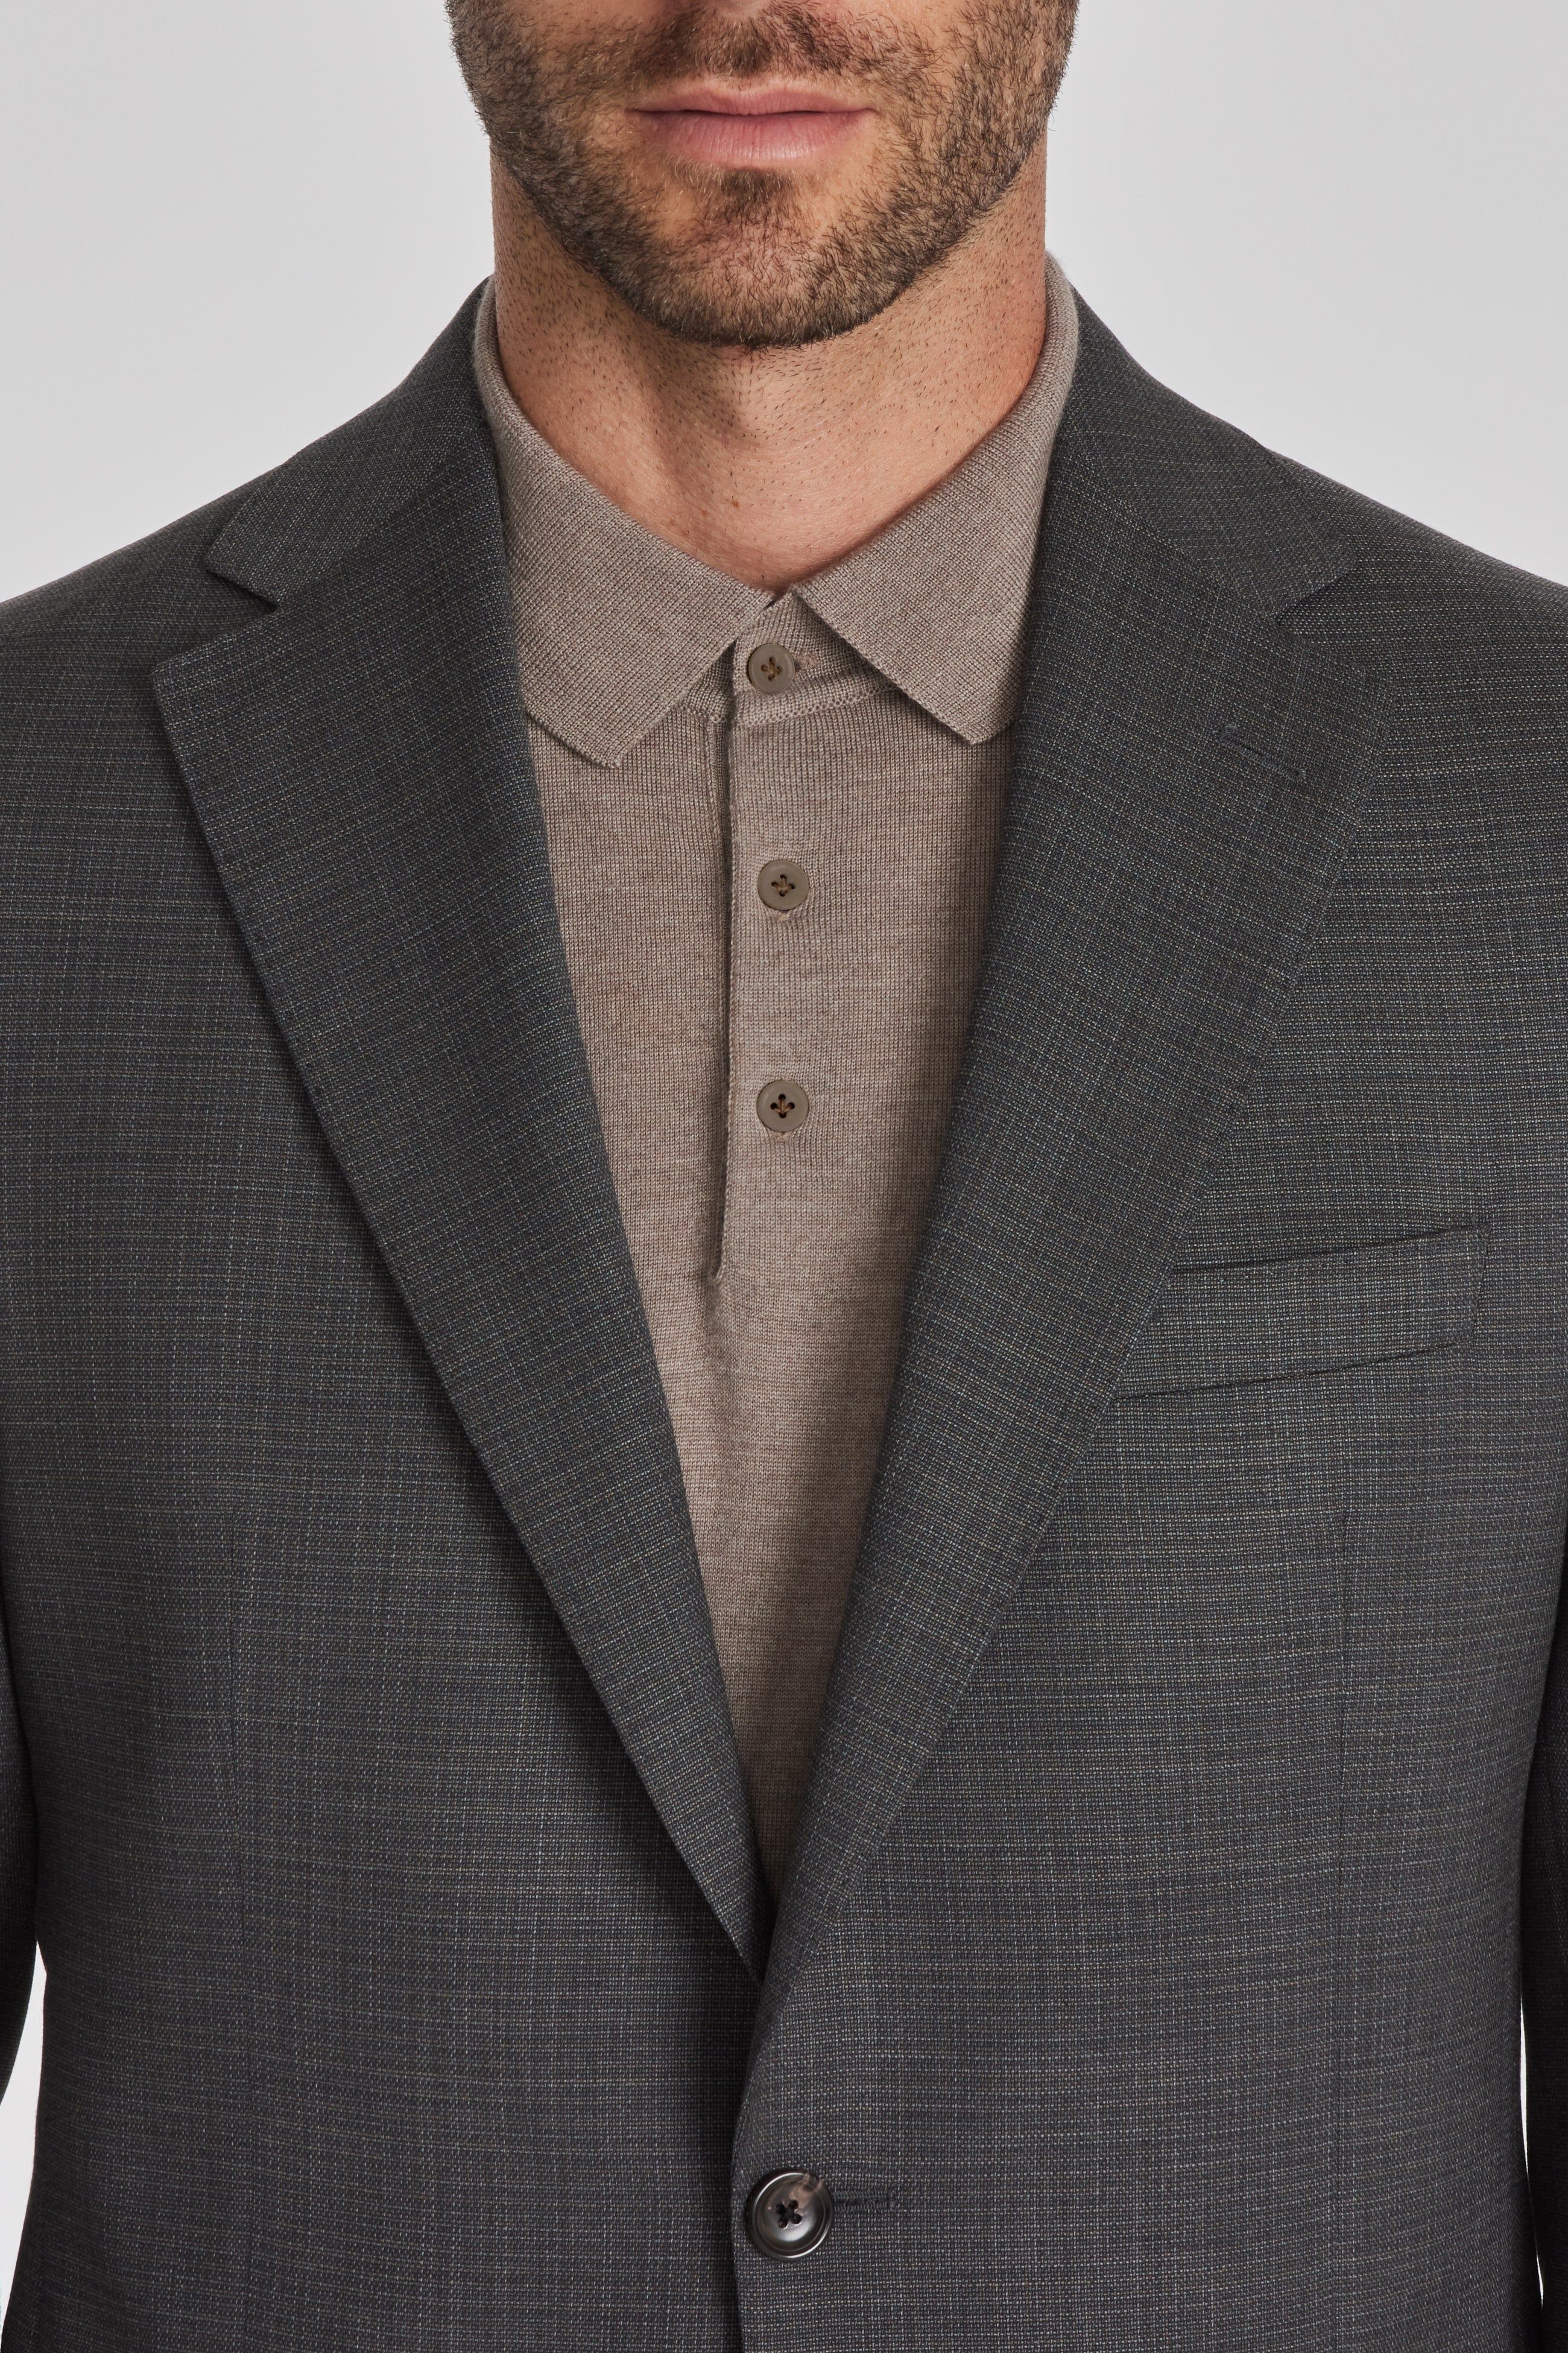 Esprit Charcoal Micro Pattern Super 120's Wool Stretch Suit